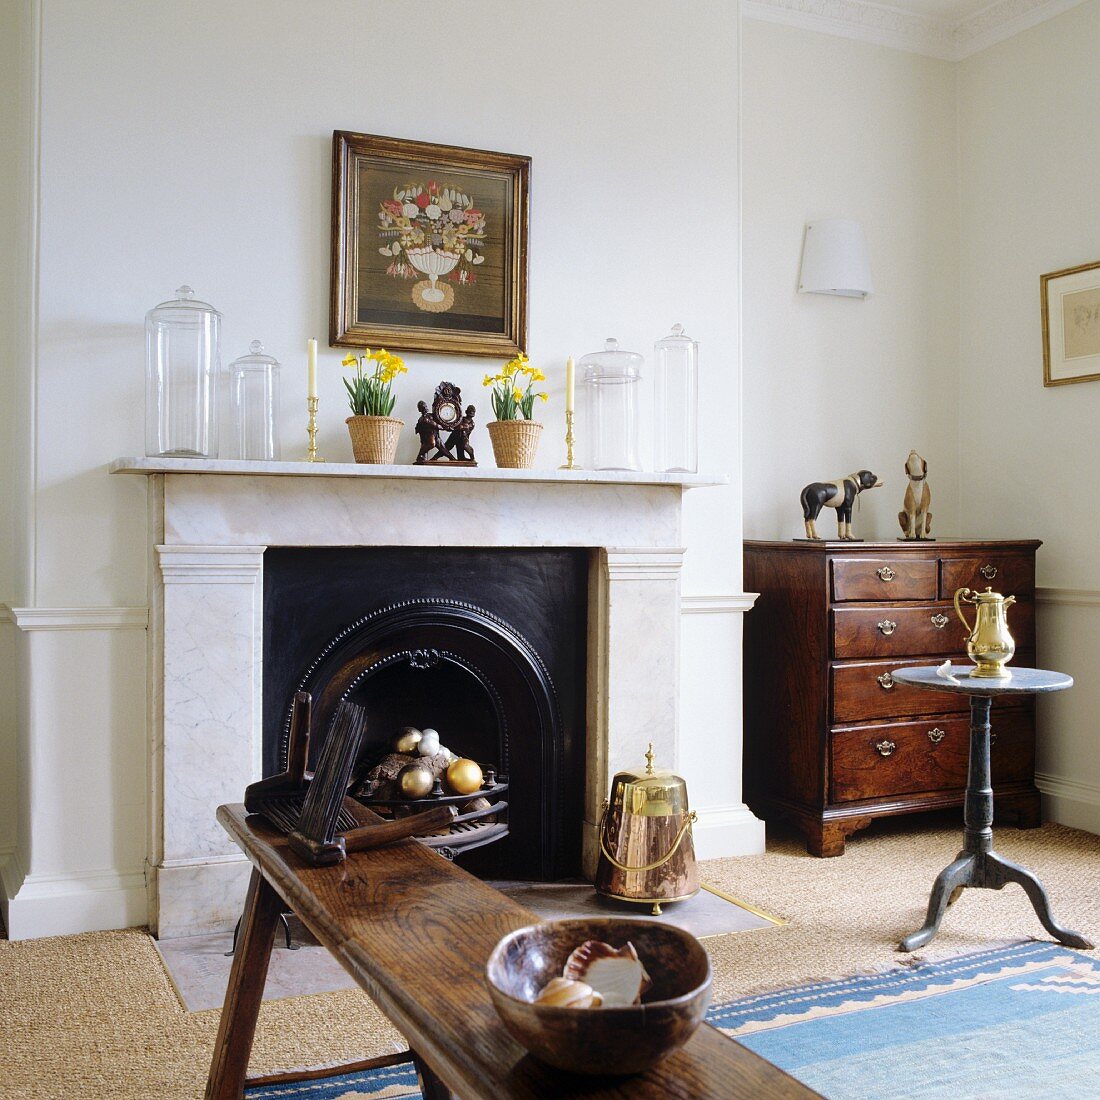 Interior with wooden bench in front of open fireplace, glass vessels on mantelpiece and antique, wooden chest of drawers in corner